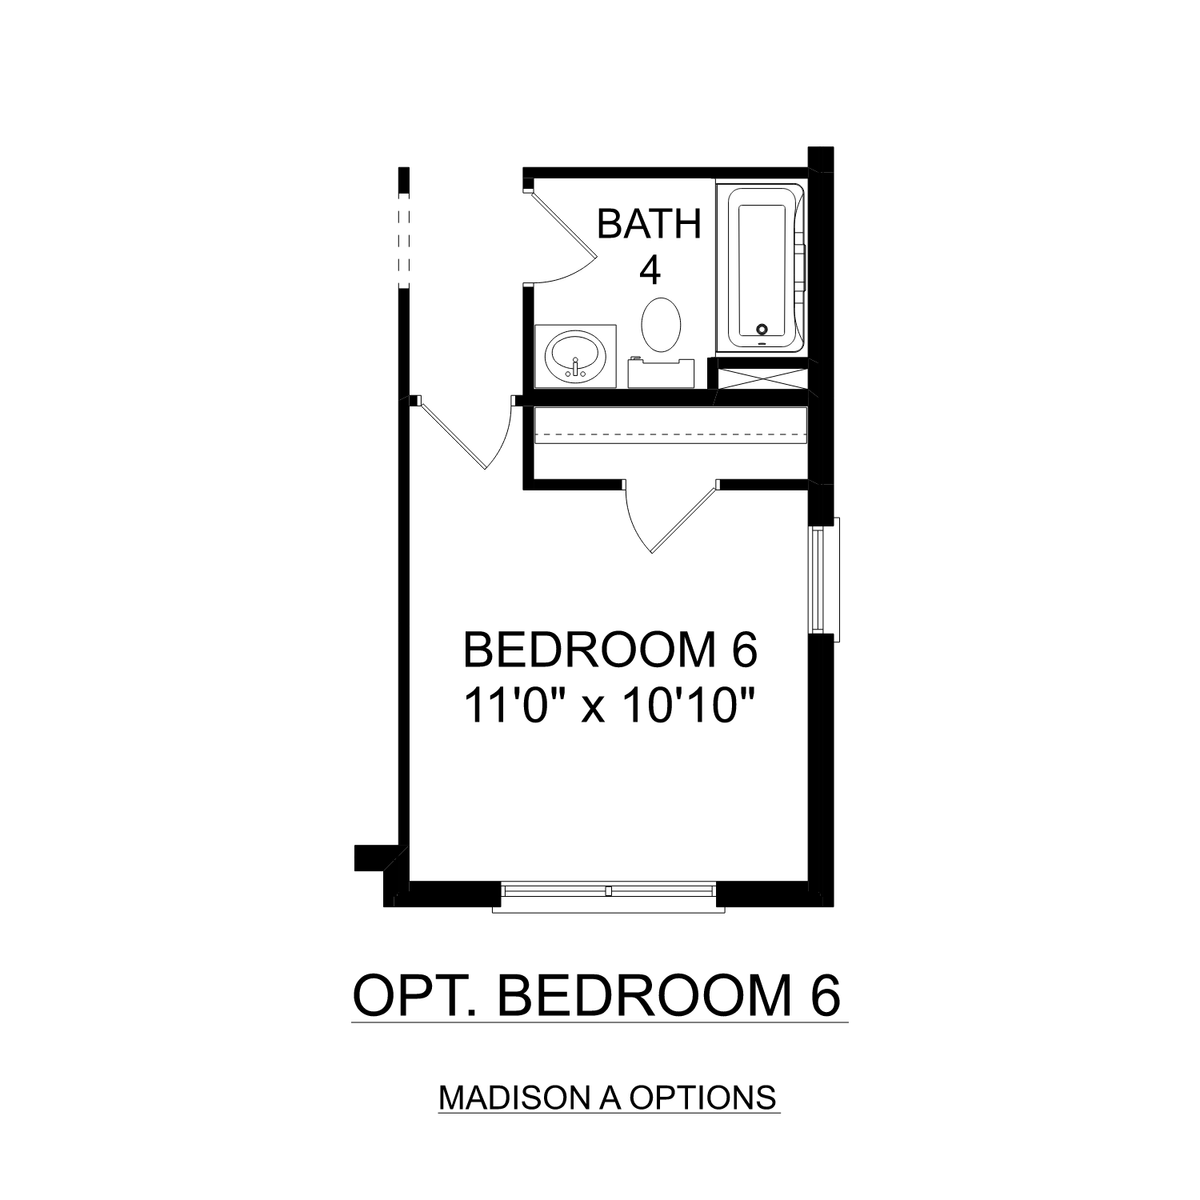 3 - The Madison A buildable floor plan layout in Davidson Homes' Creekside community.